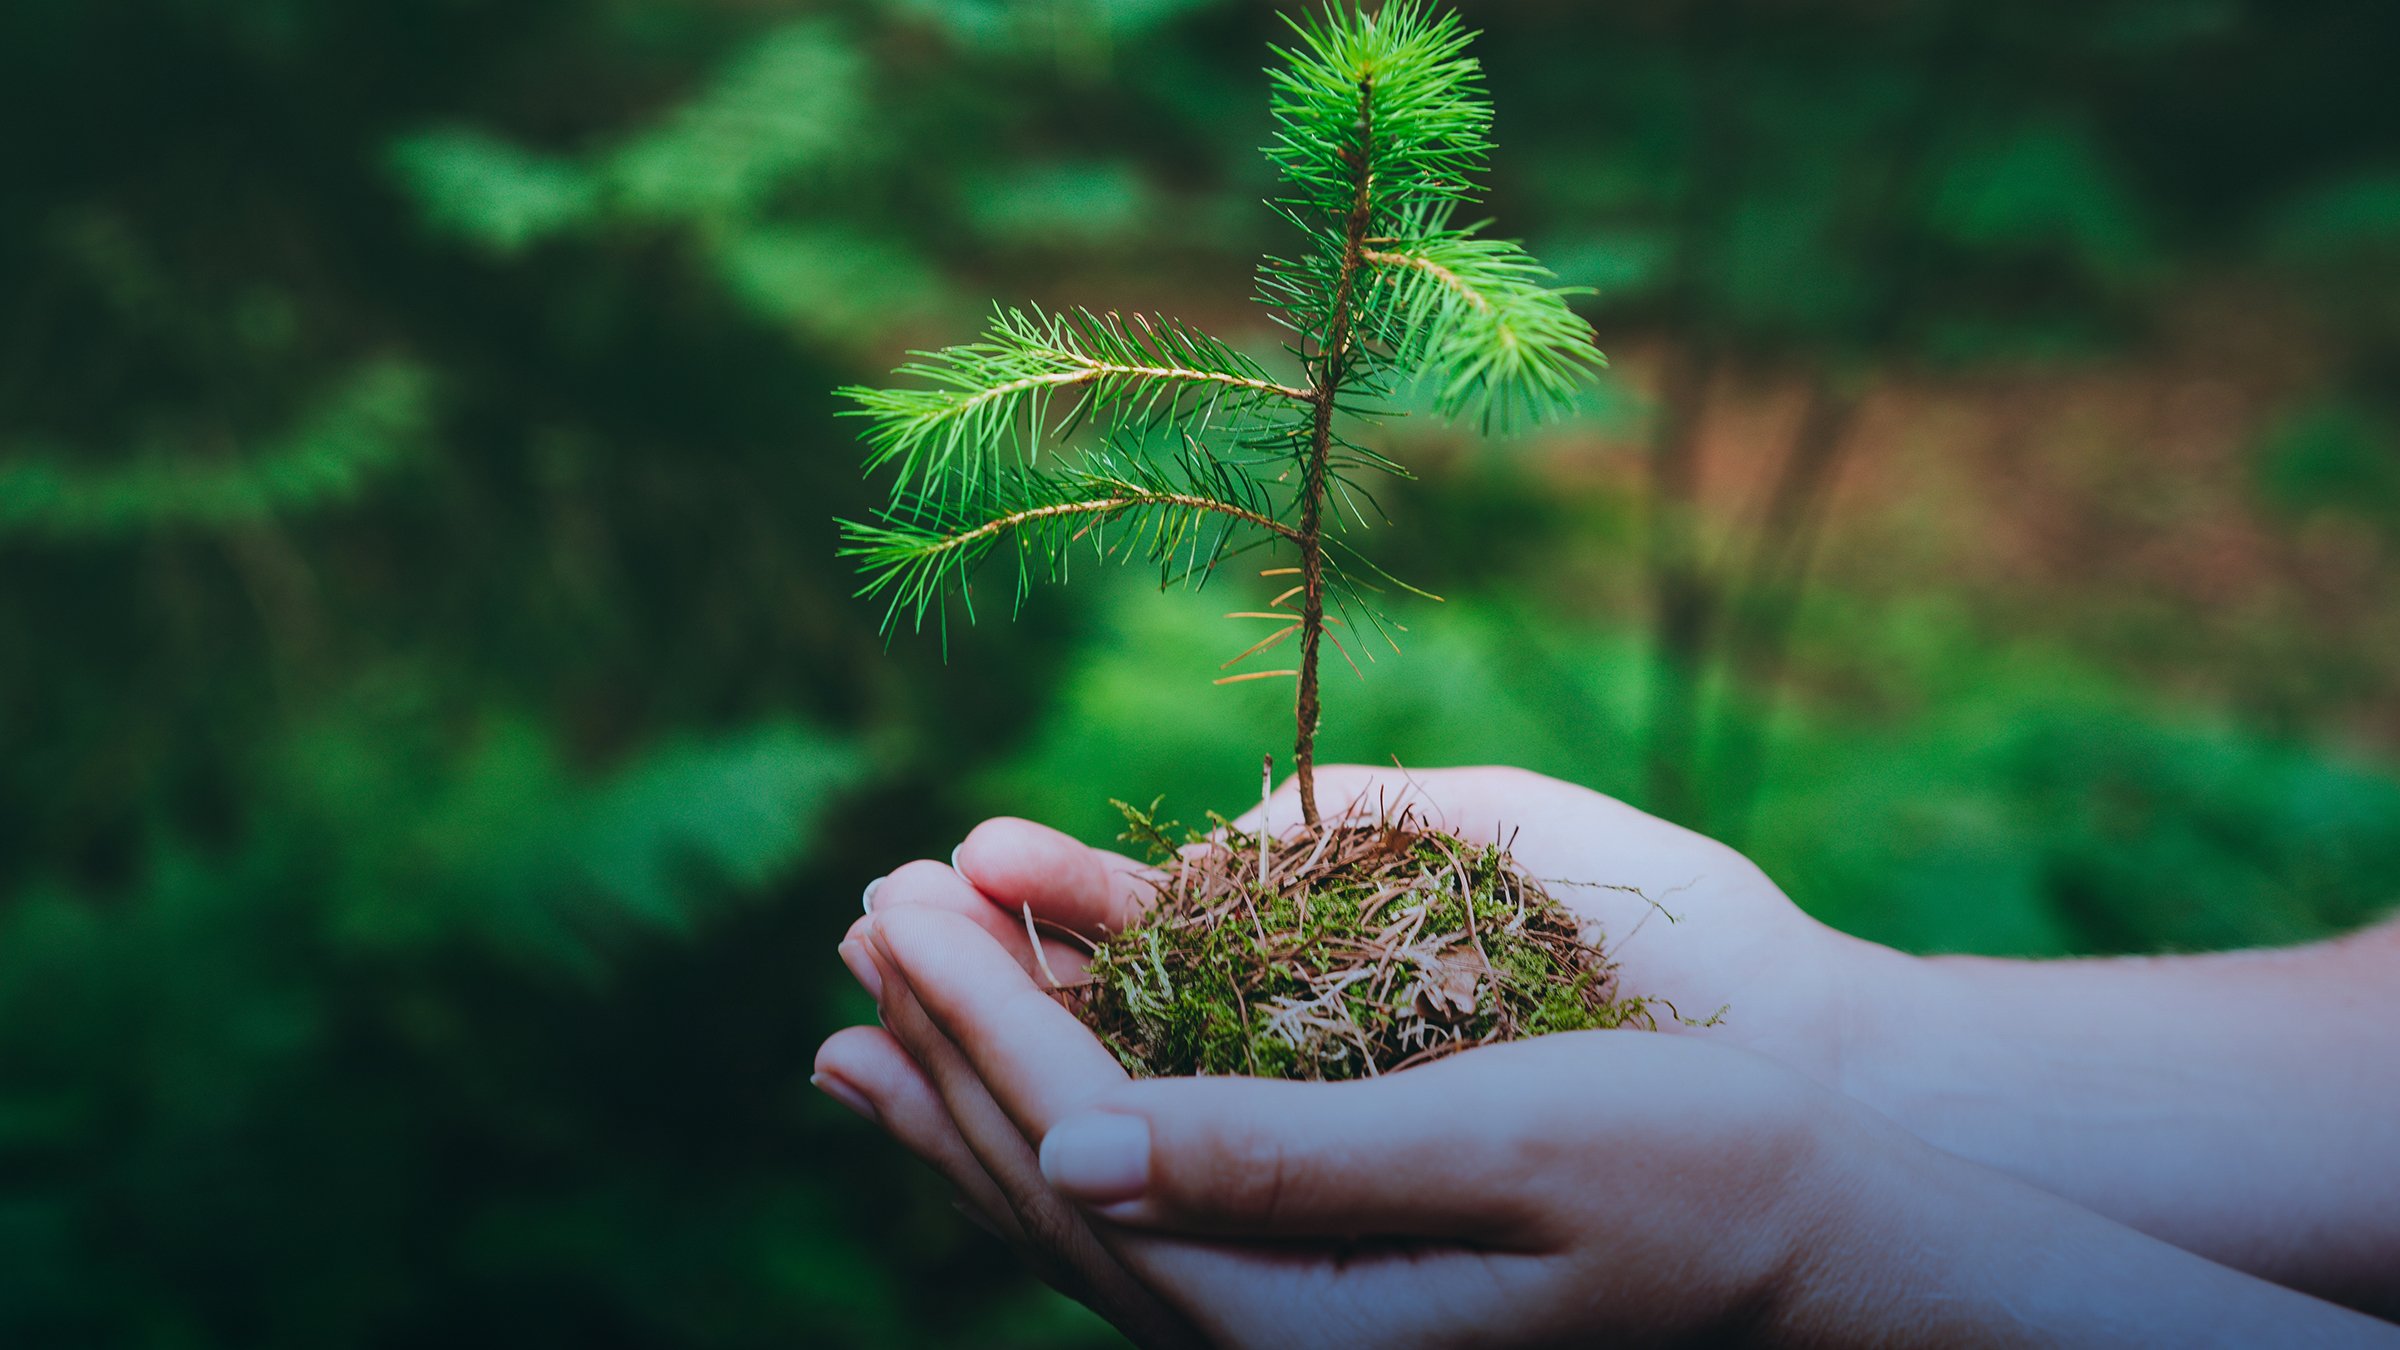 Female hand holding wild pine tree seedling in green forest depicting sustainability